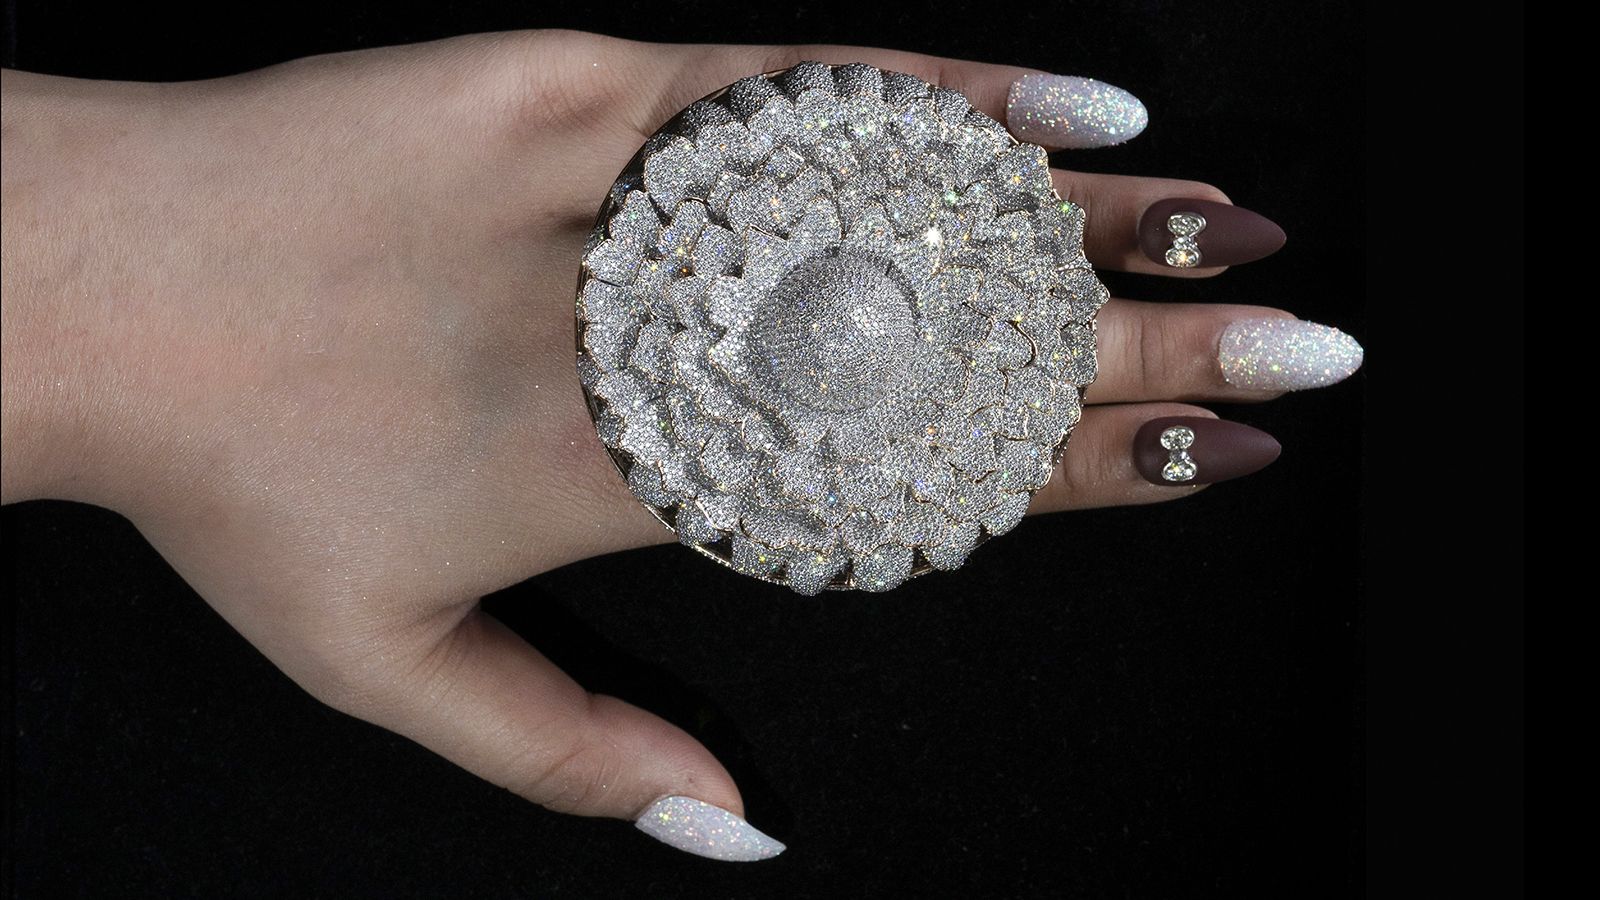 The Most Expensive Soccer Ball Made out of Diamonds 